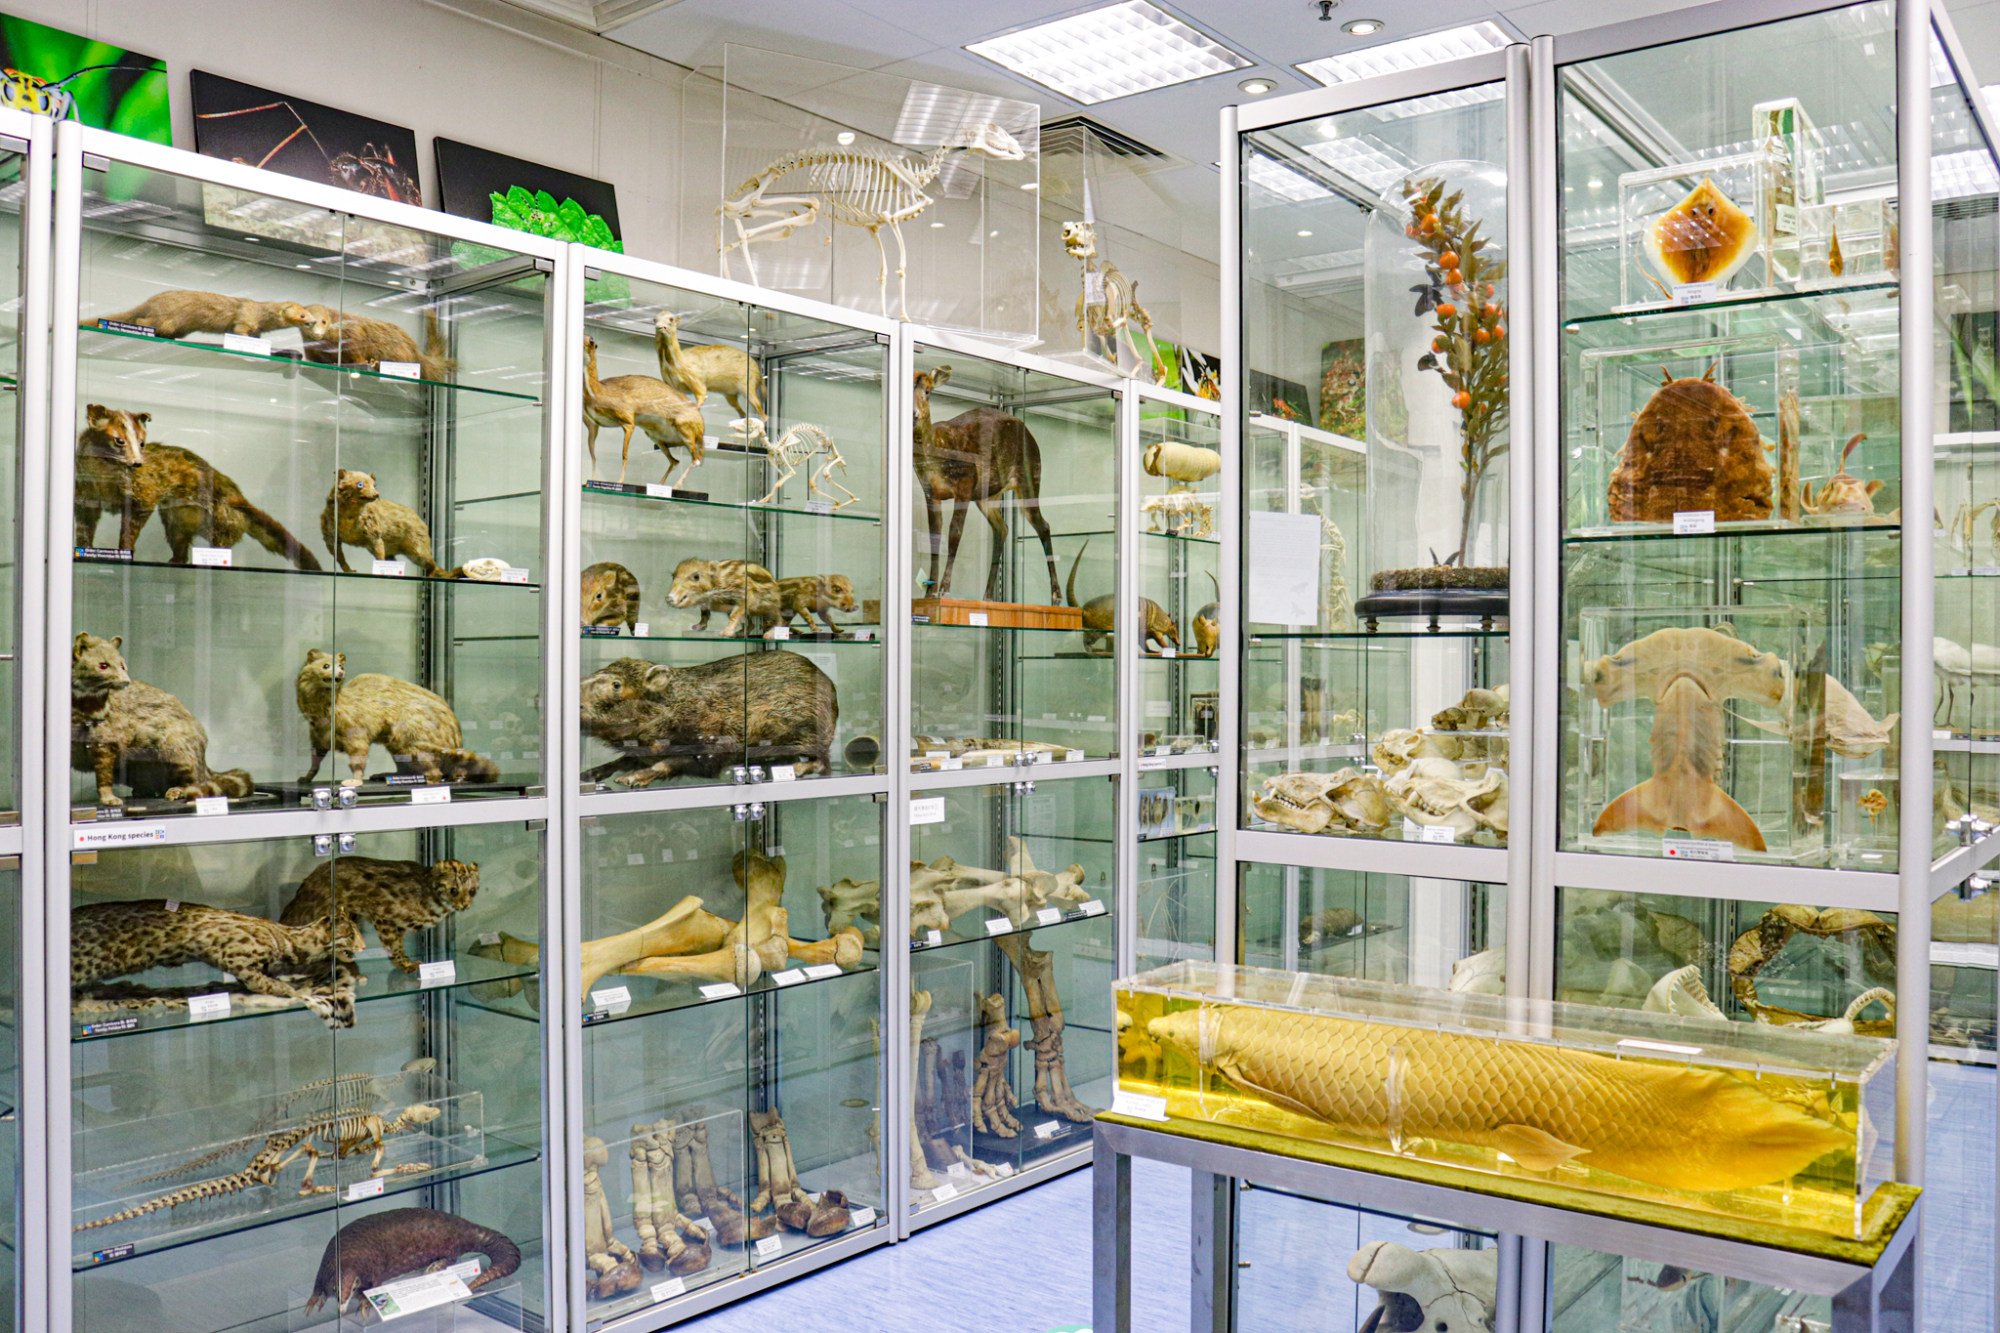 The museum is home to thousands of specimens some of which were once used as teaching aids. Photo: The Hong Kong Biodiversity Museum